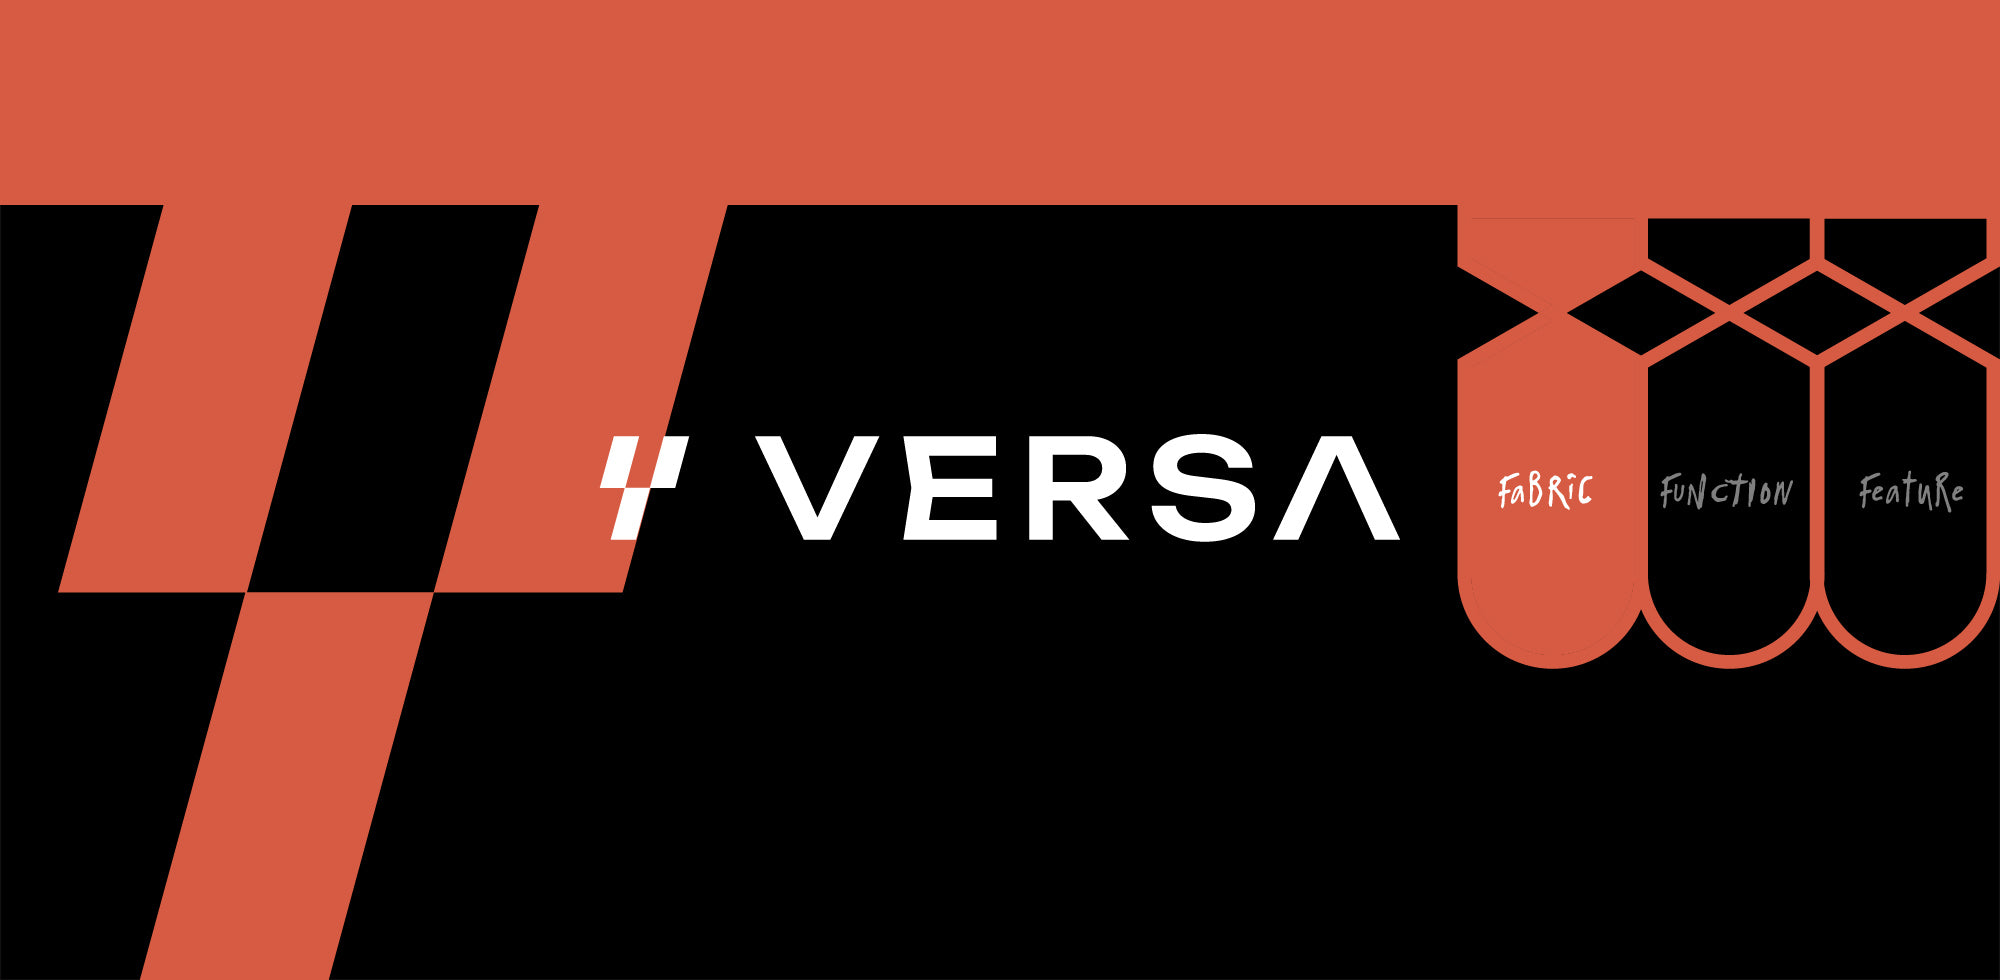 Versa Fabric, Function, Feature